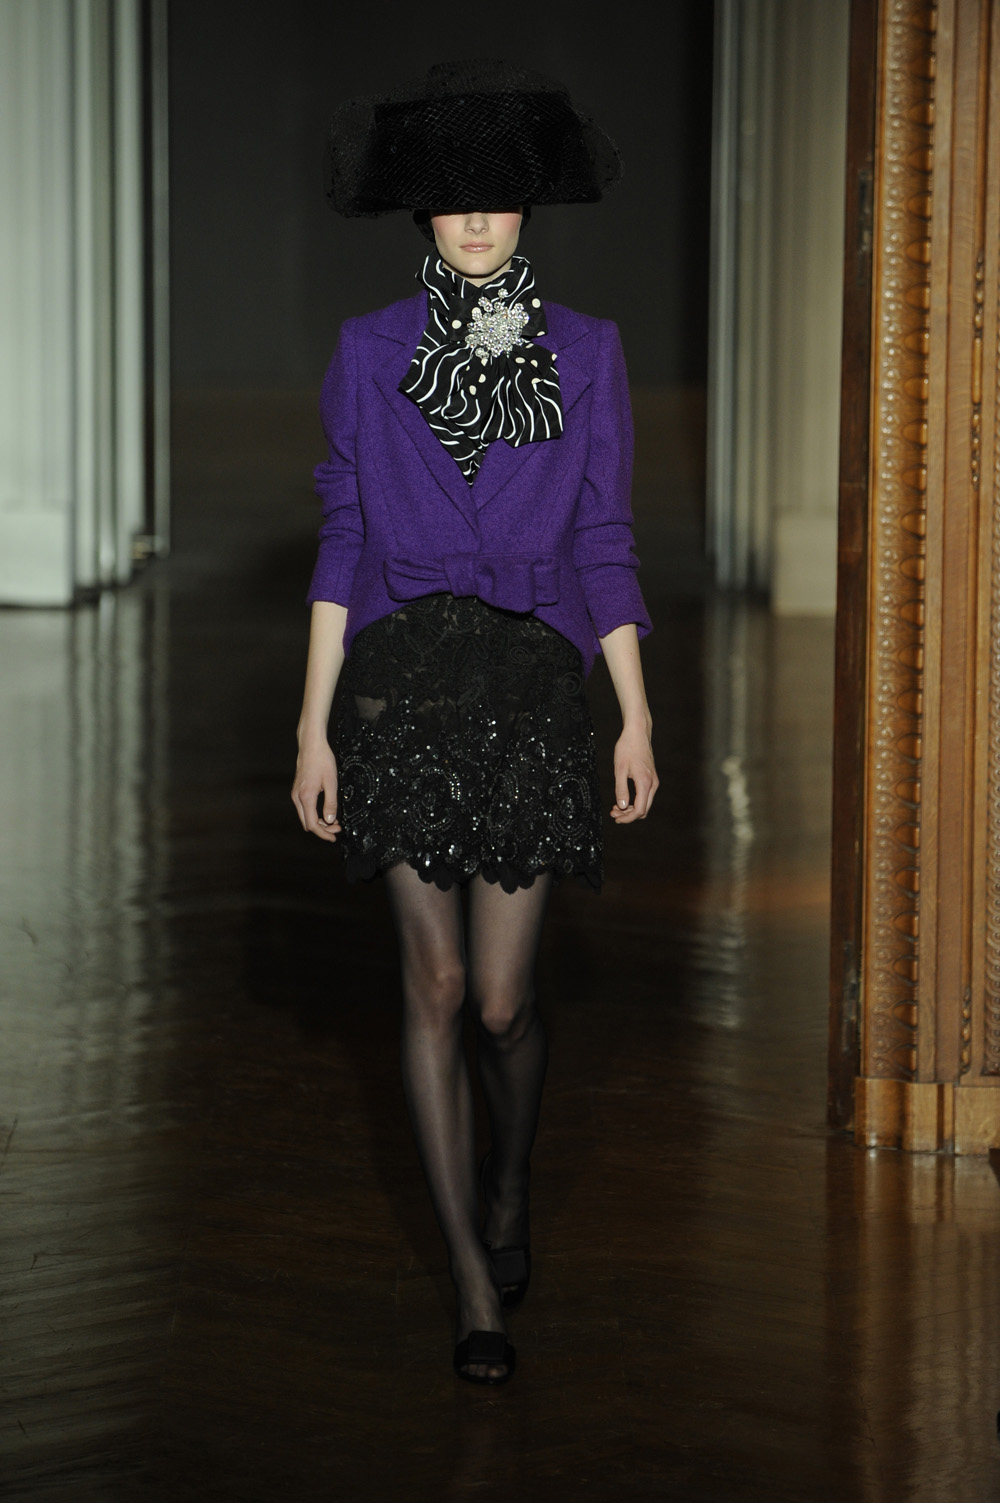 Christian Lacroix Haute Couture Fall 2009: It’s Goodnight, not Goodbye